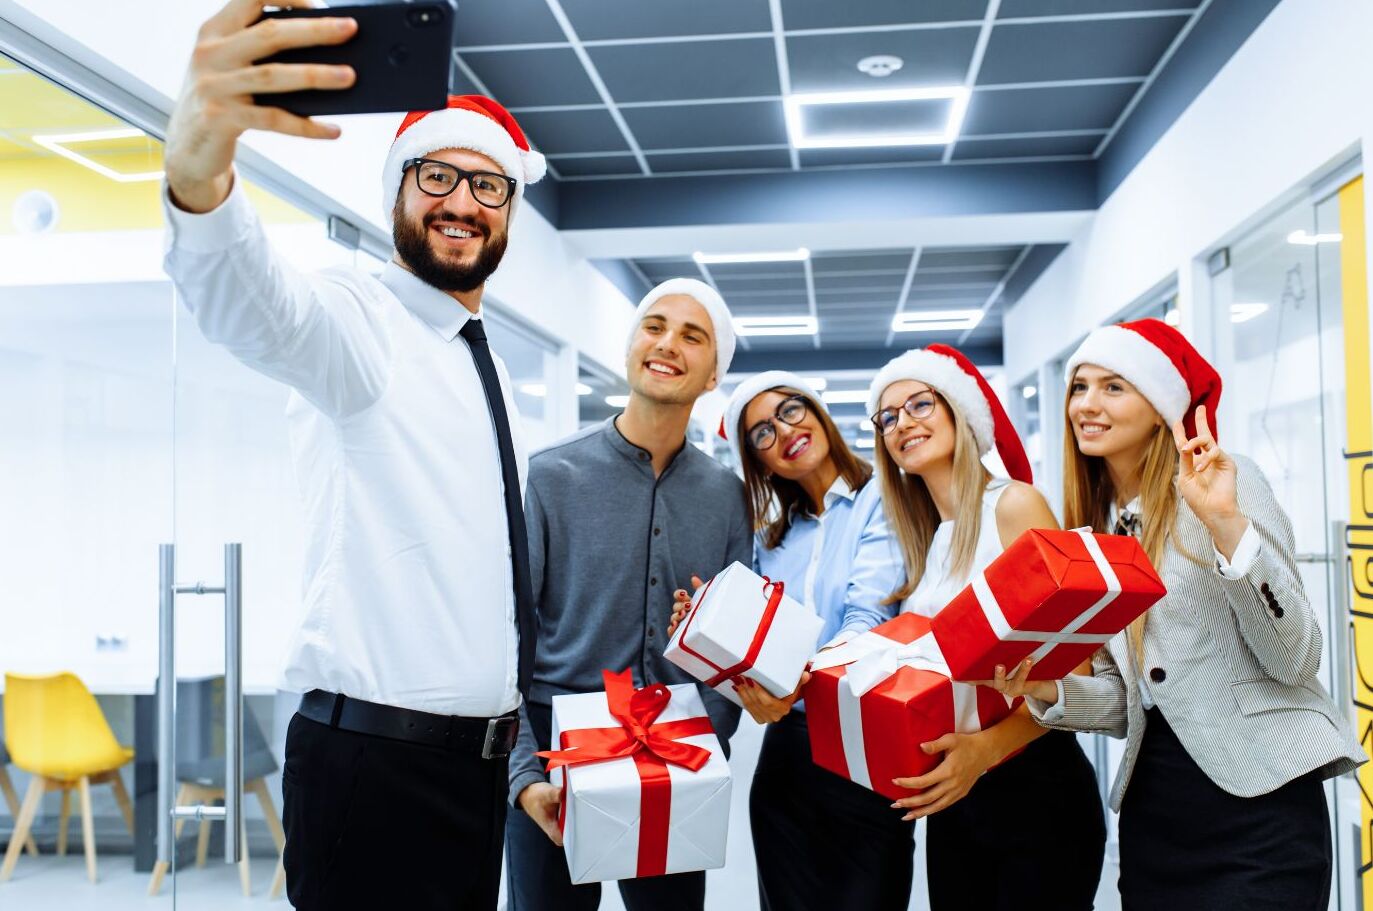 How to socialise at the work Christmas party